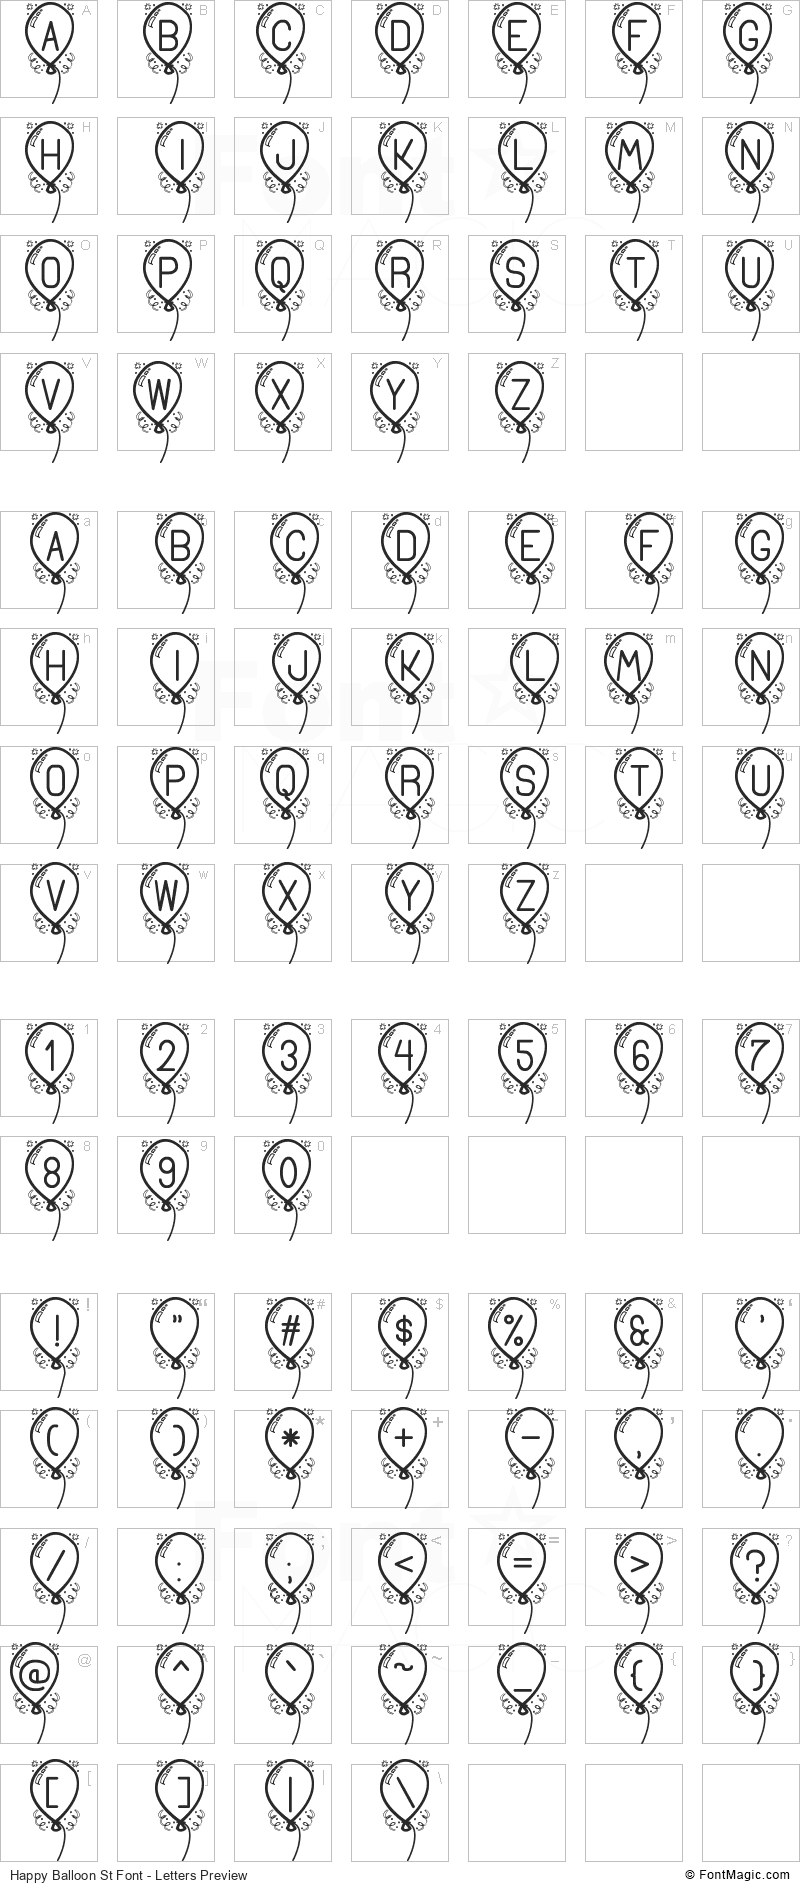 Happy Balloon St Font - All Latters Preview Chart